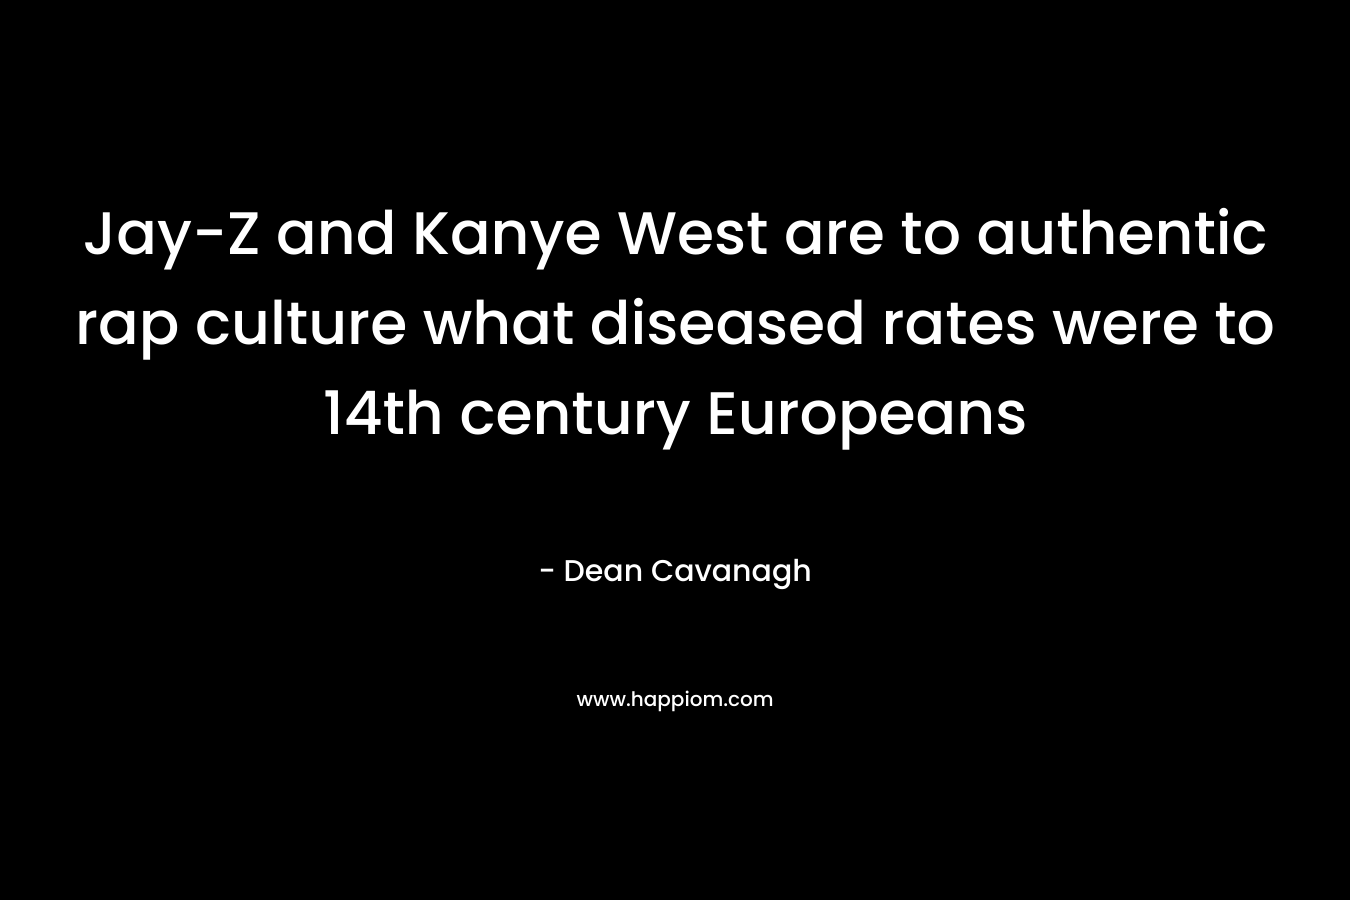 Jay-Z and Kanye West are to authentic rap culture what diseased rates were to 14th century Europeans – Dean Cavanagh